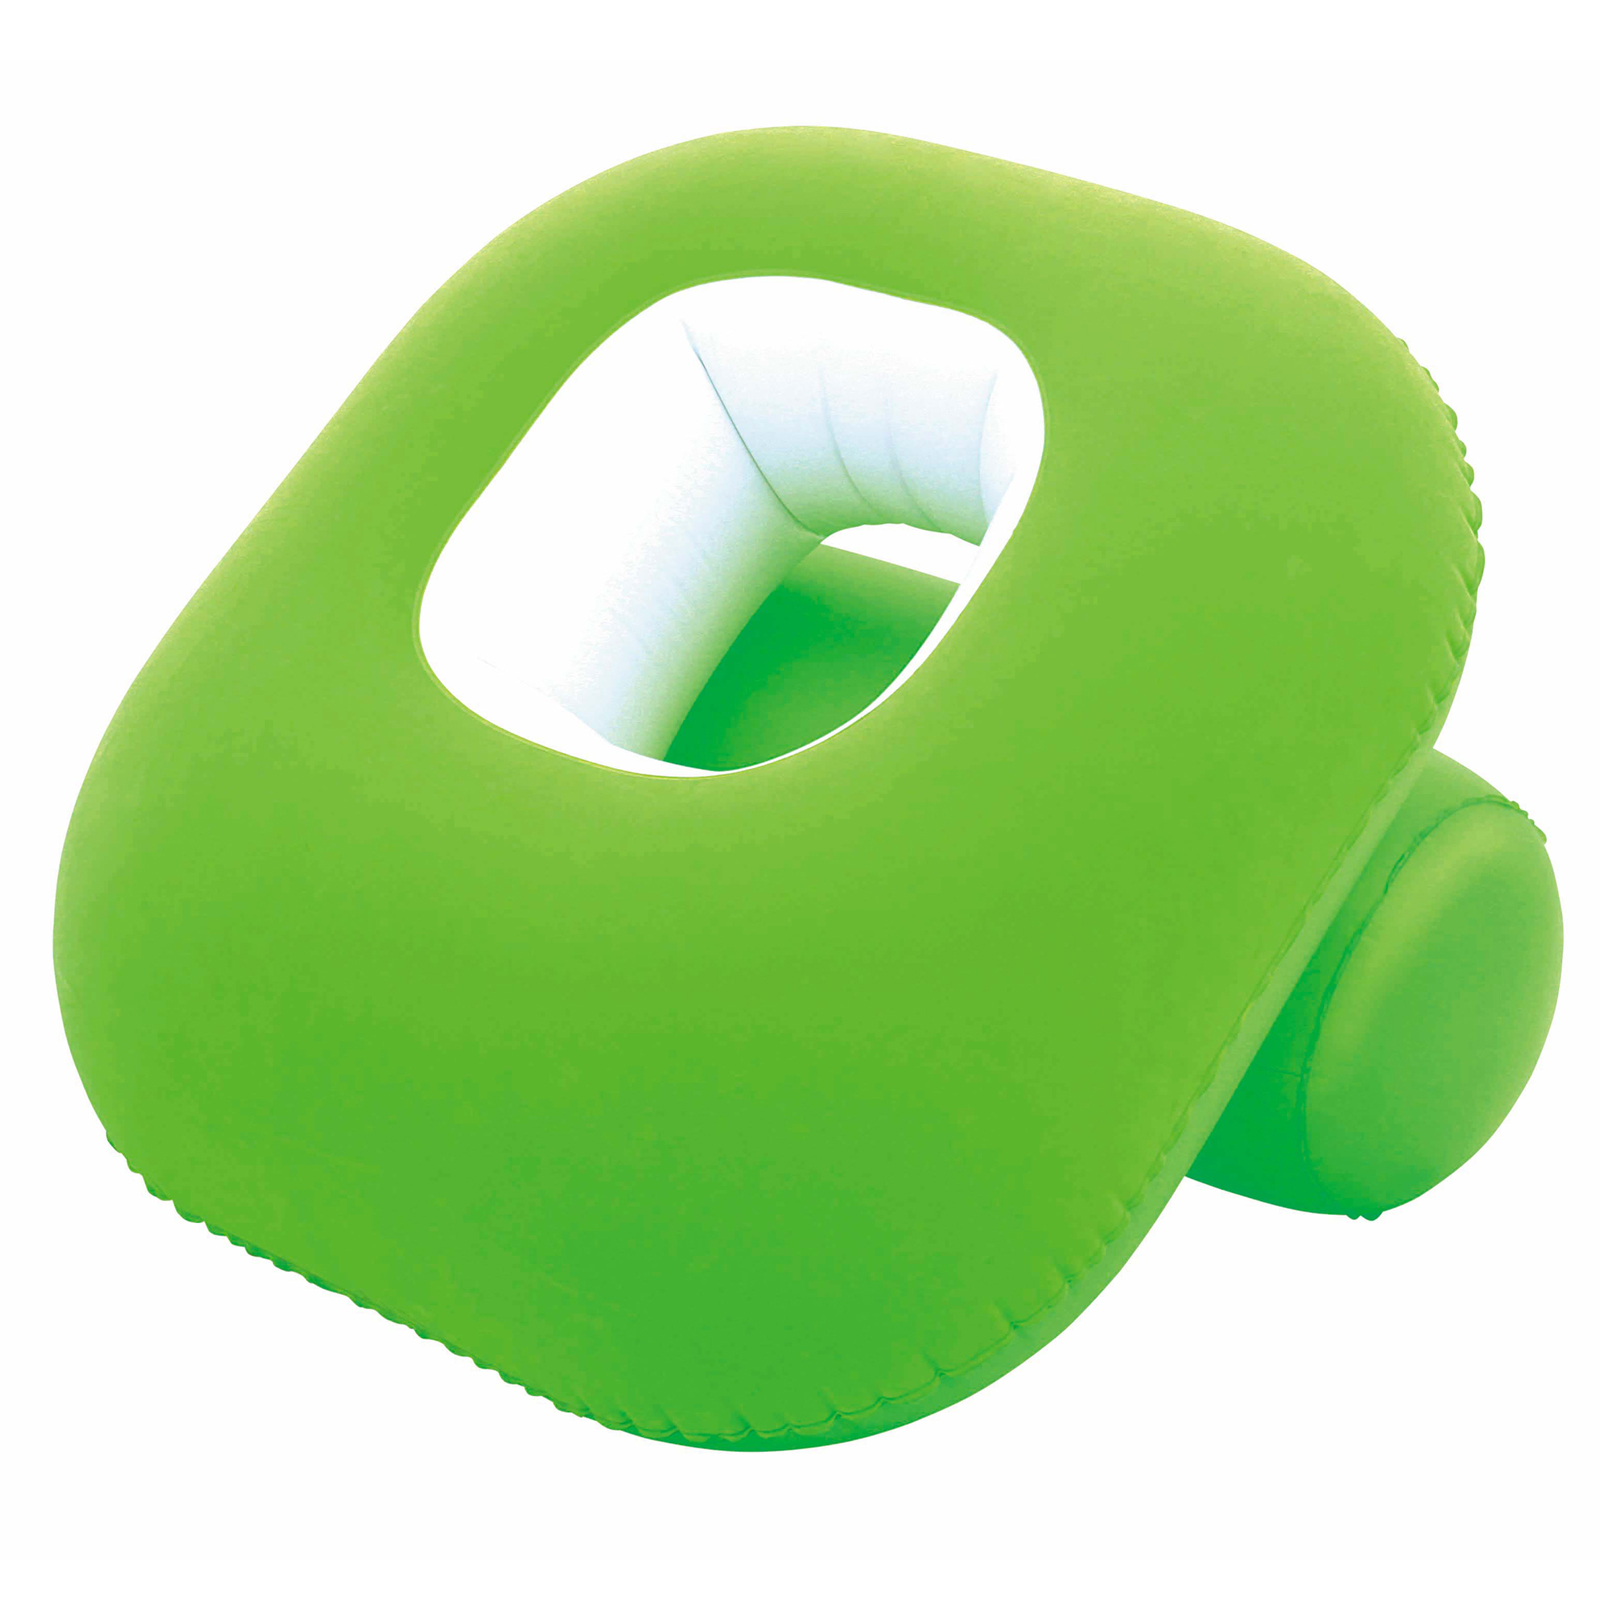 UPC 821808100170 product image for Bestway Nestair Inflatable Chair - Green | upcitemdb.com